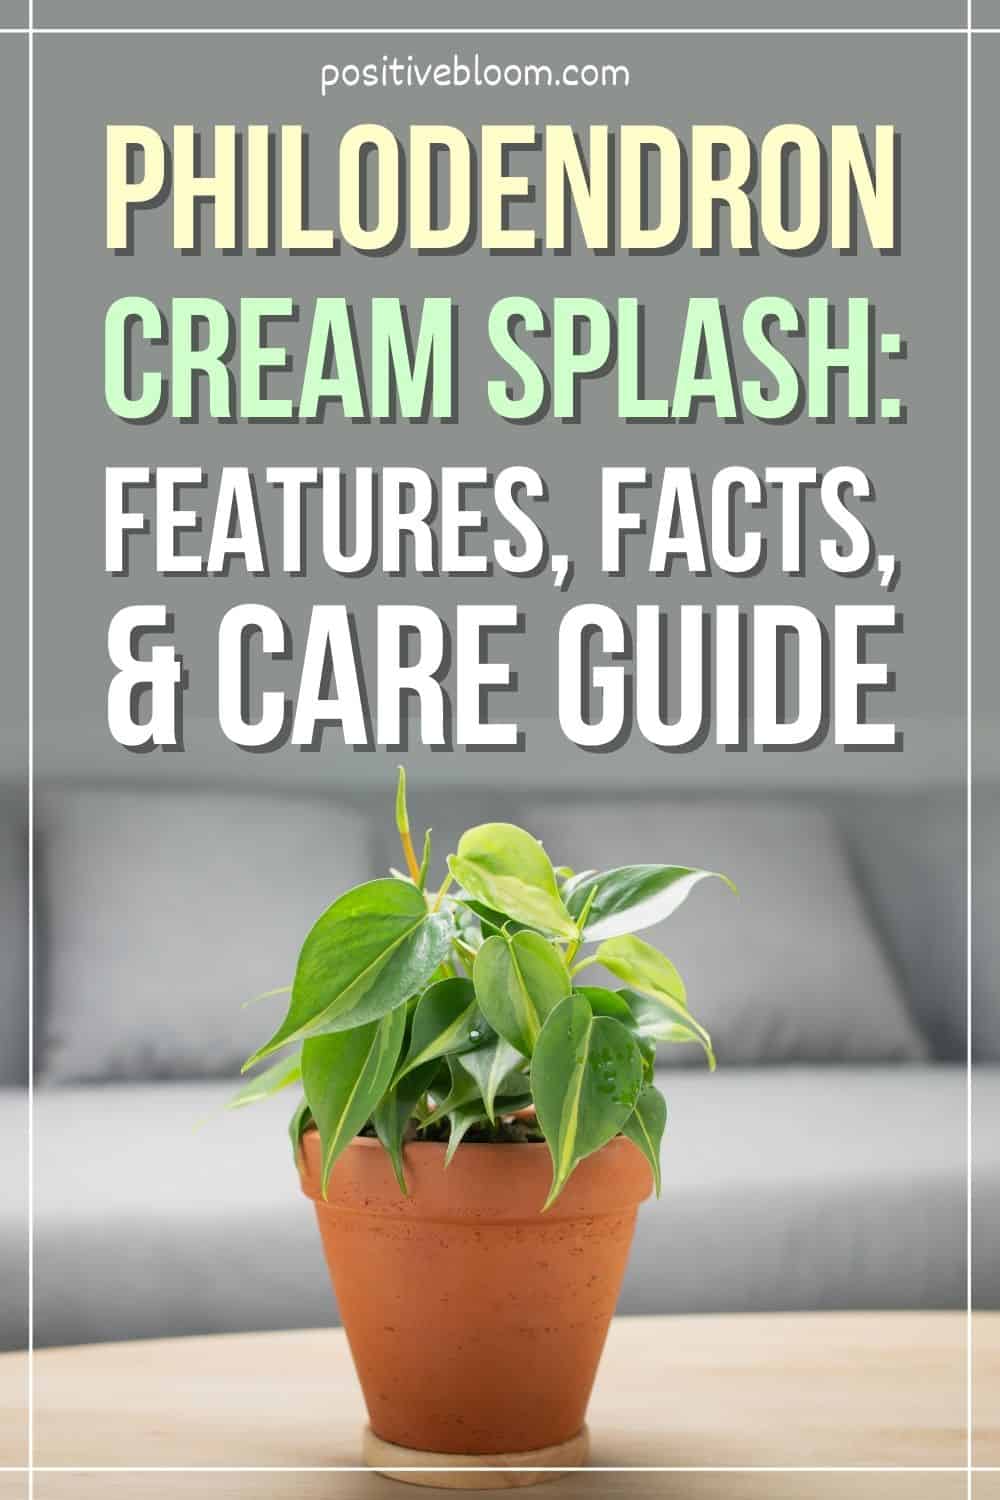 Philodendron Cream Splash Features, Facts, And Care Guide Pinterest